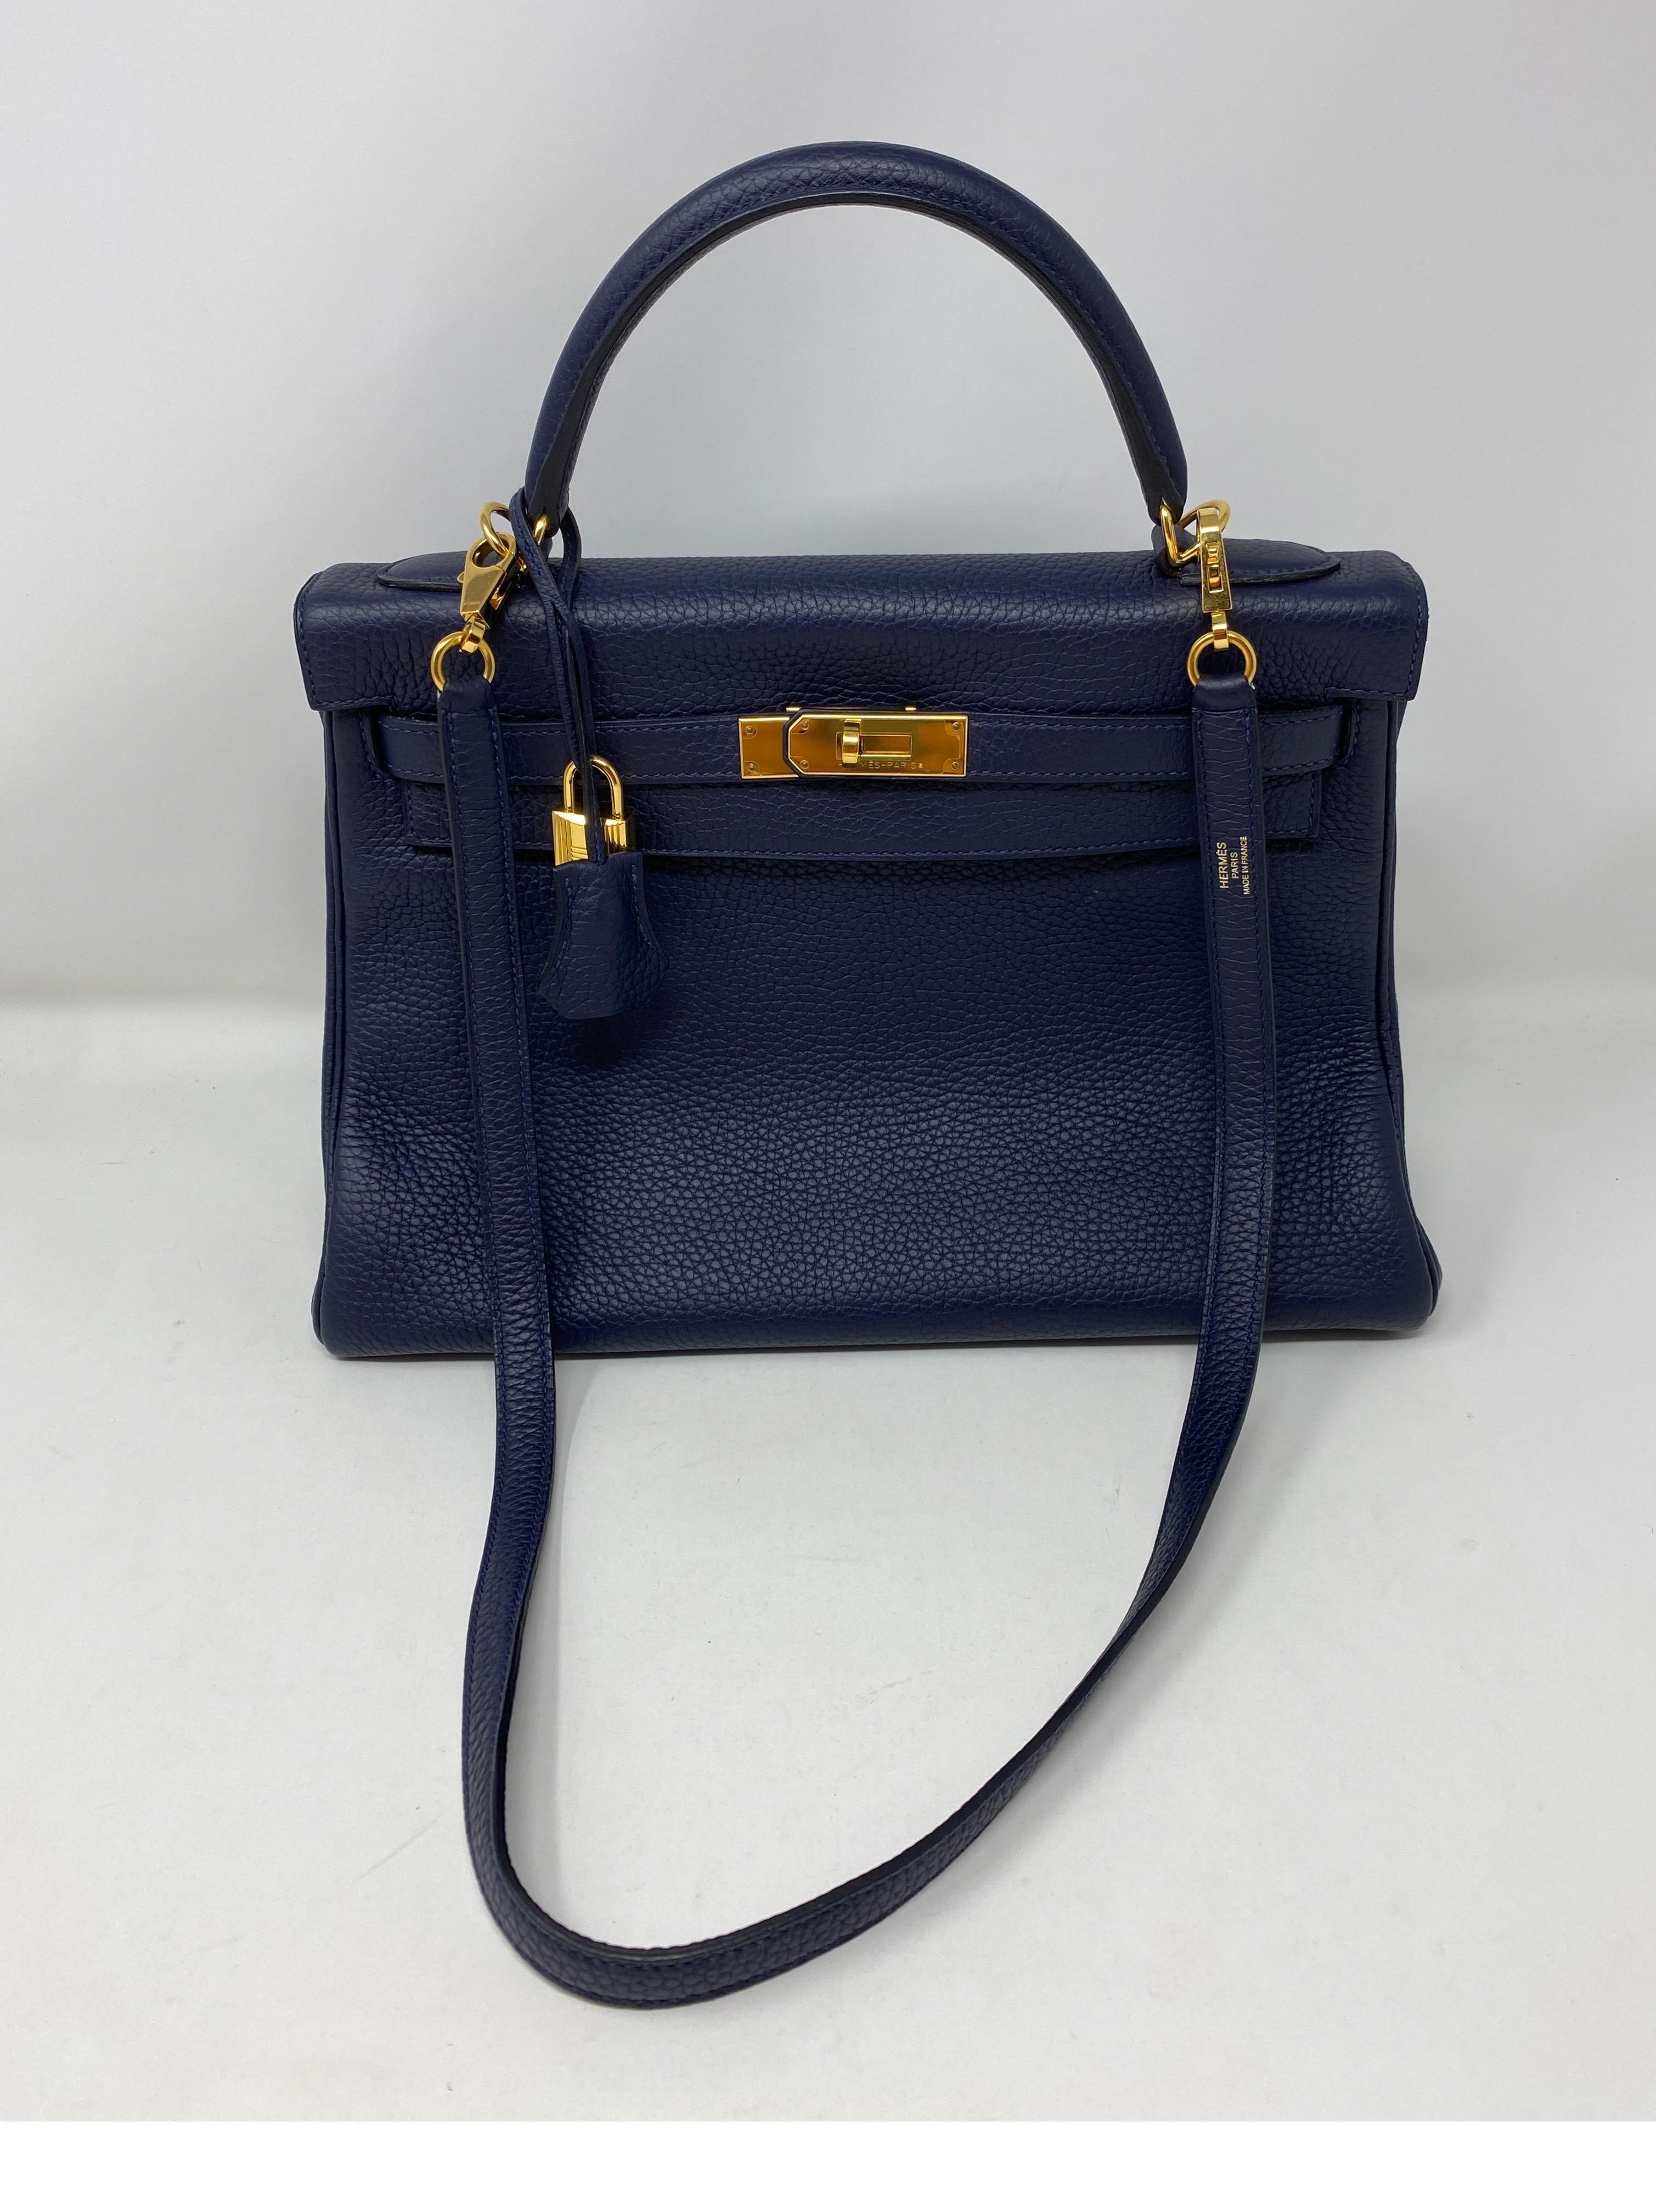 Hermes Navy Kelly 32 Bag. Most wanted smaller size Kelly 32. Gorgeous dark blue color with gold hardware. Clemence leather. Excellent like new condition. Add to your collection. Includes clochette, lock, keys, and dust cover. Guaranteed authentic. 